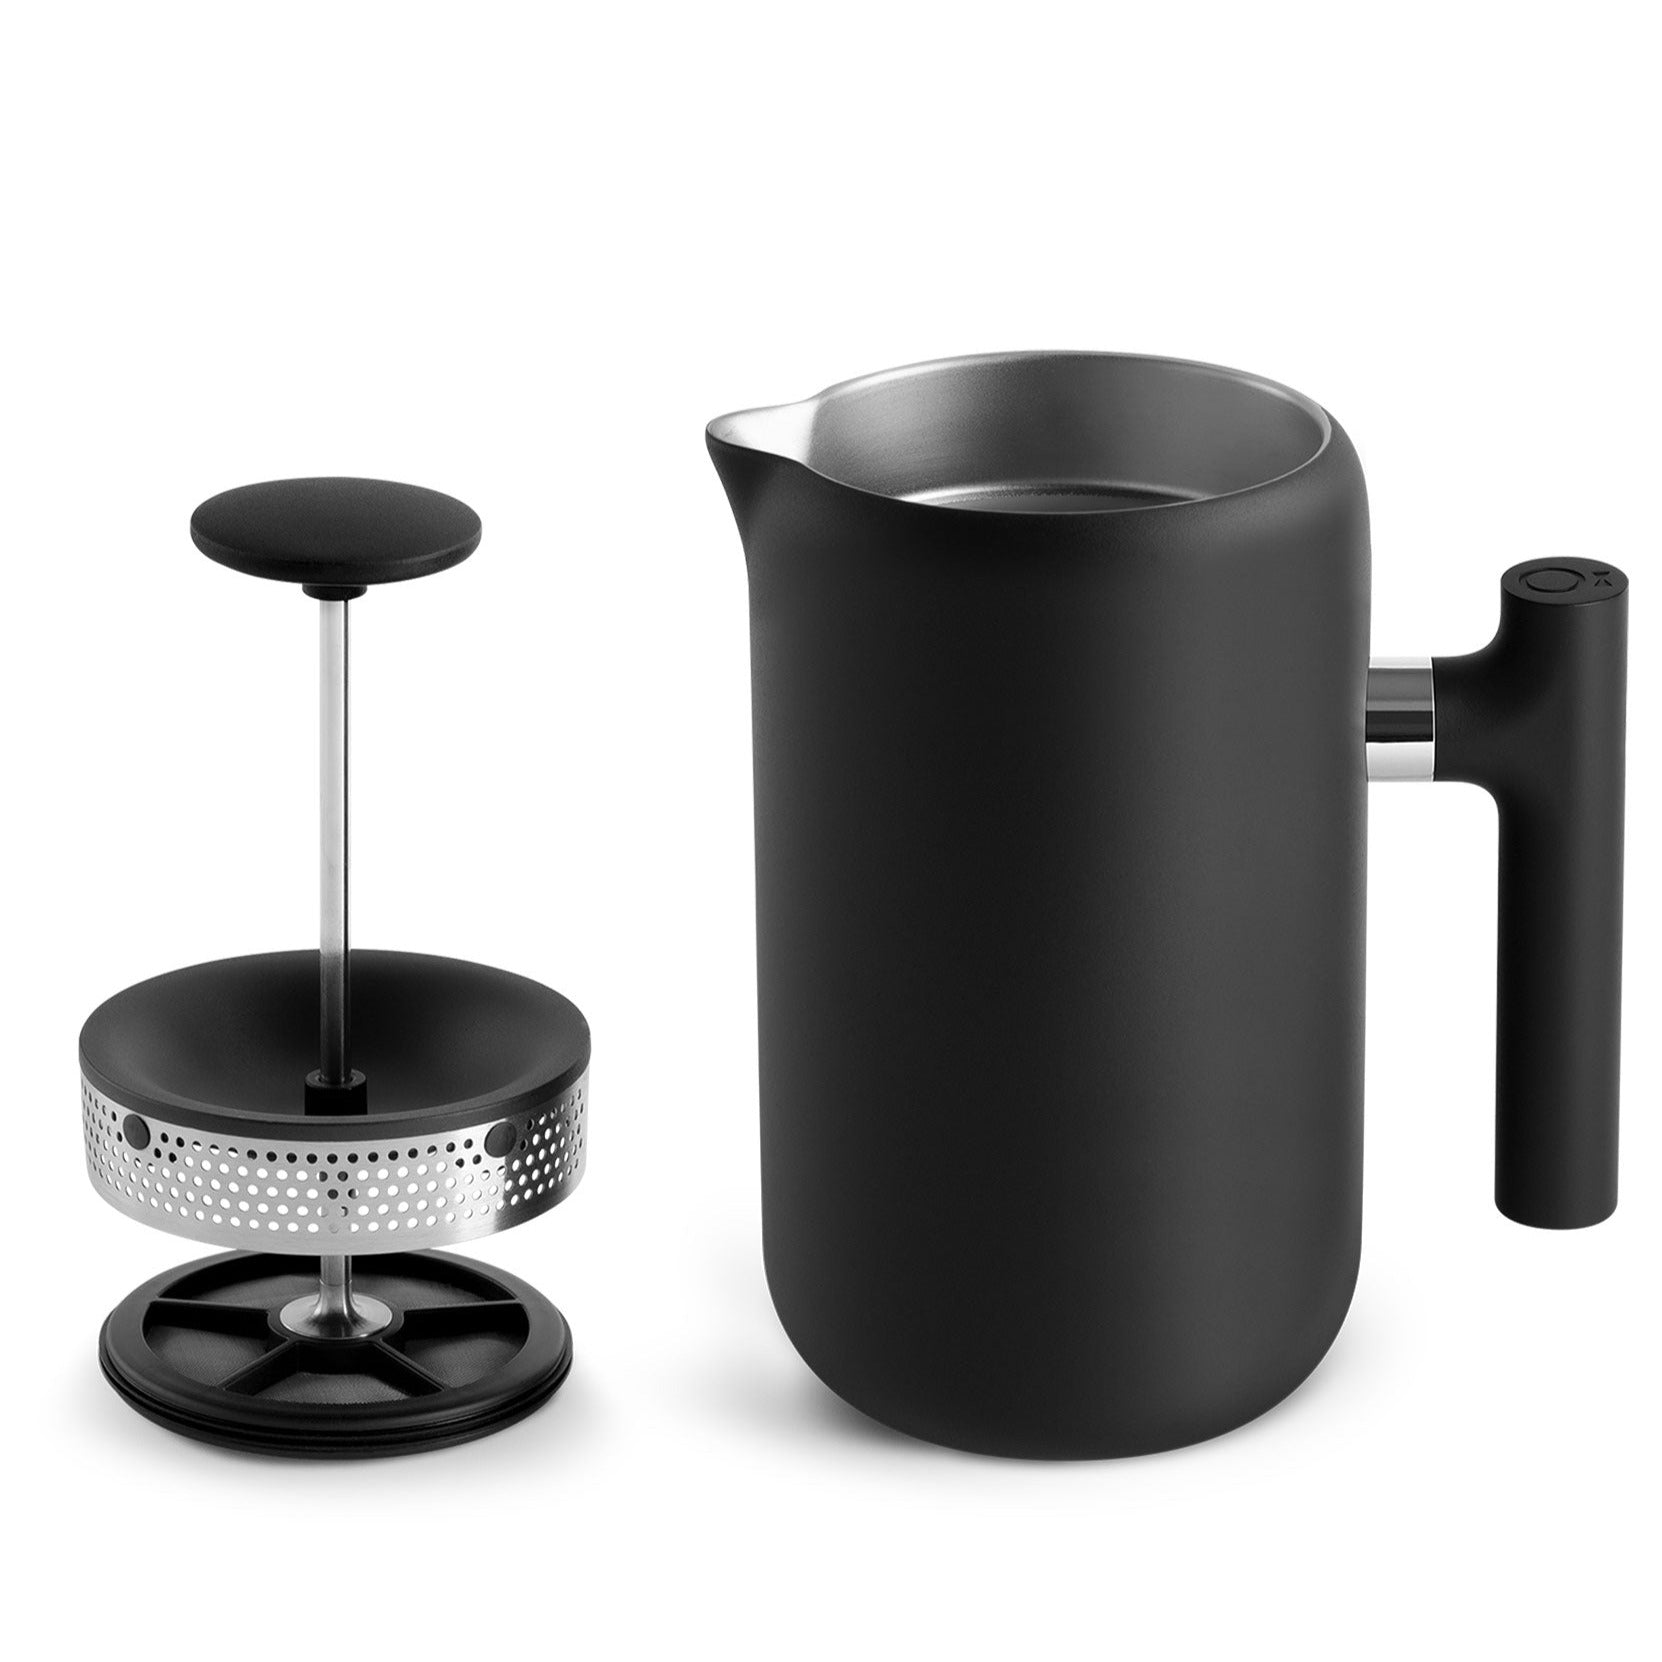 Fellow Clara French PressFellow Clara French PressCollective Coffee RoastersThe cure for the common cafetière. Our award-winning design features vacuum-insulated walls to keep your coffee hot for your second and third cups, and enhanced mesh